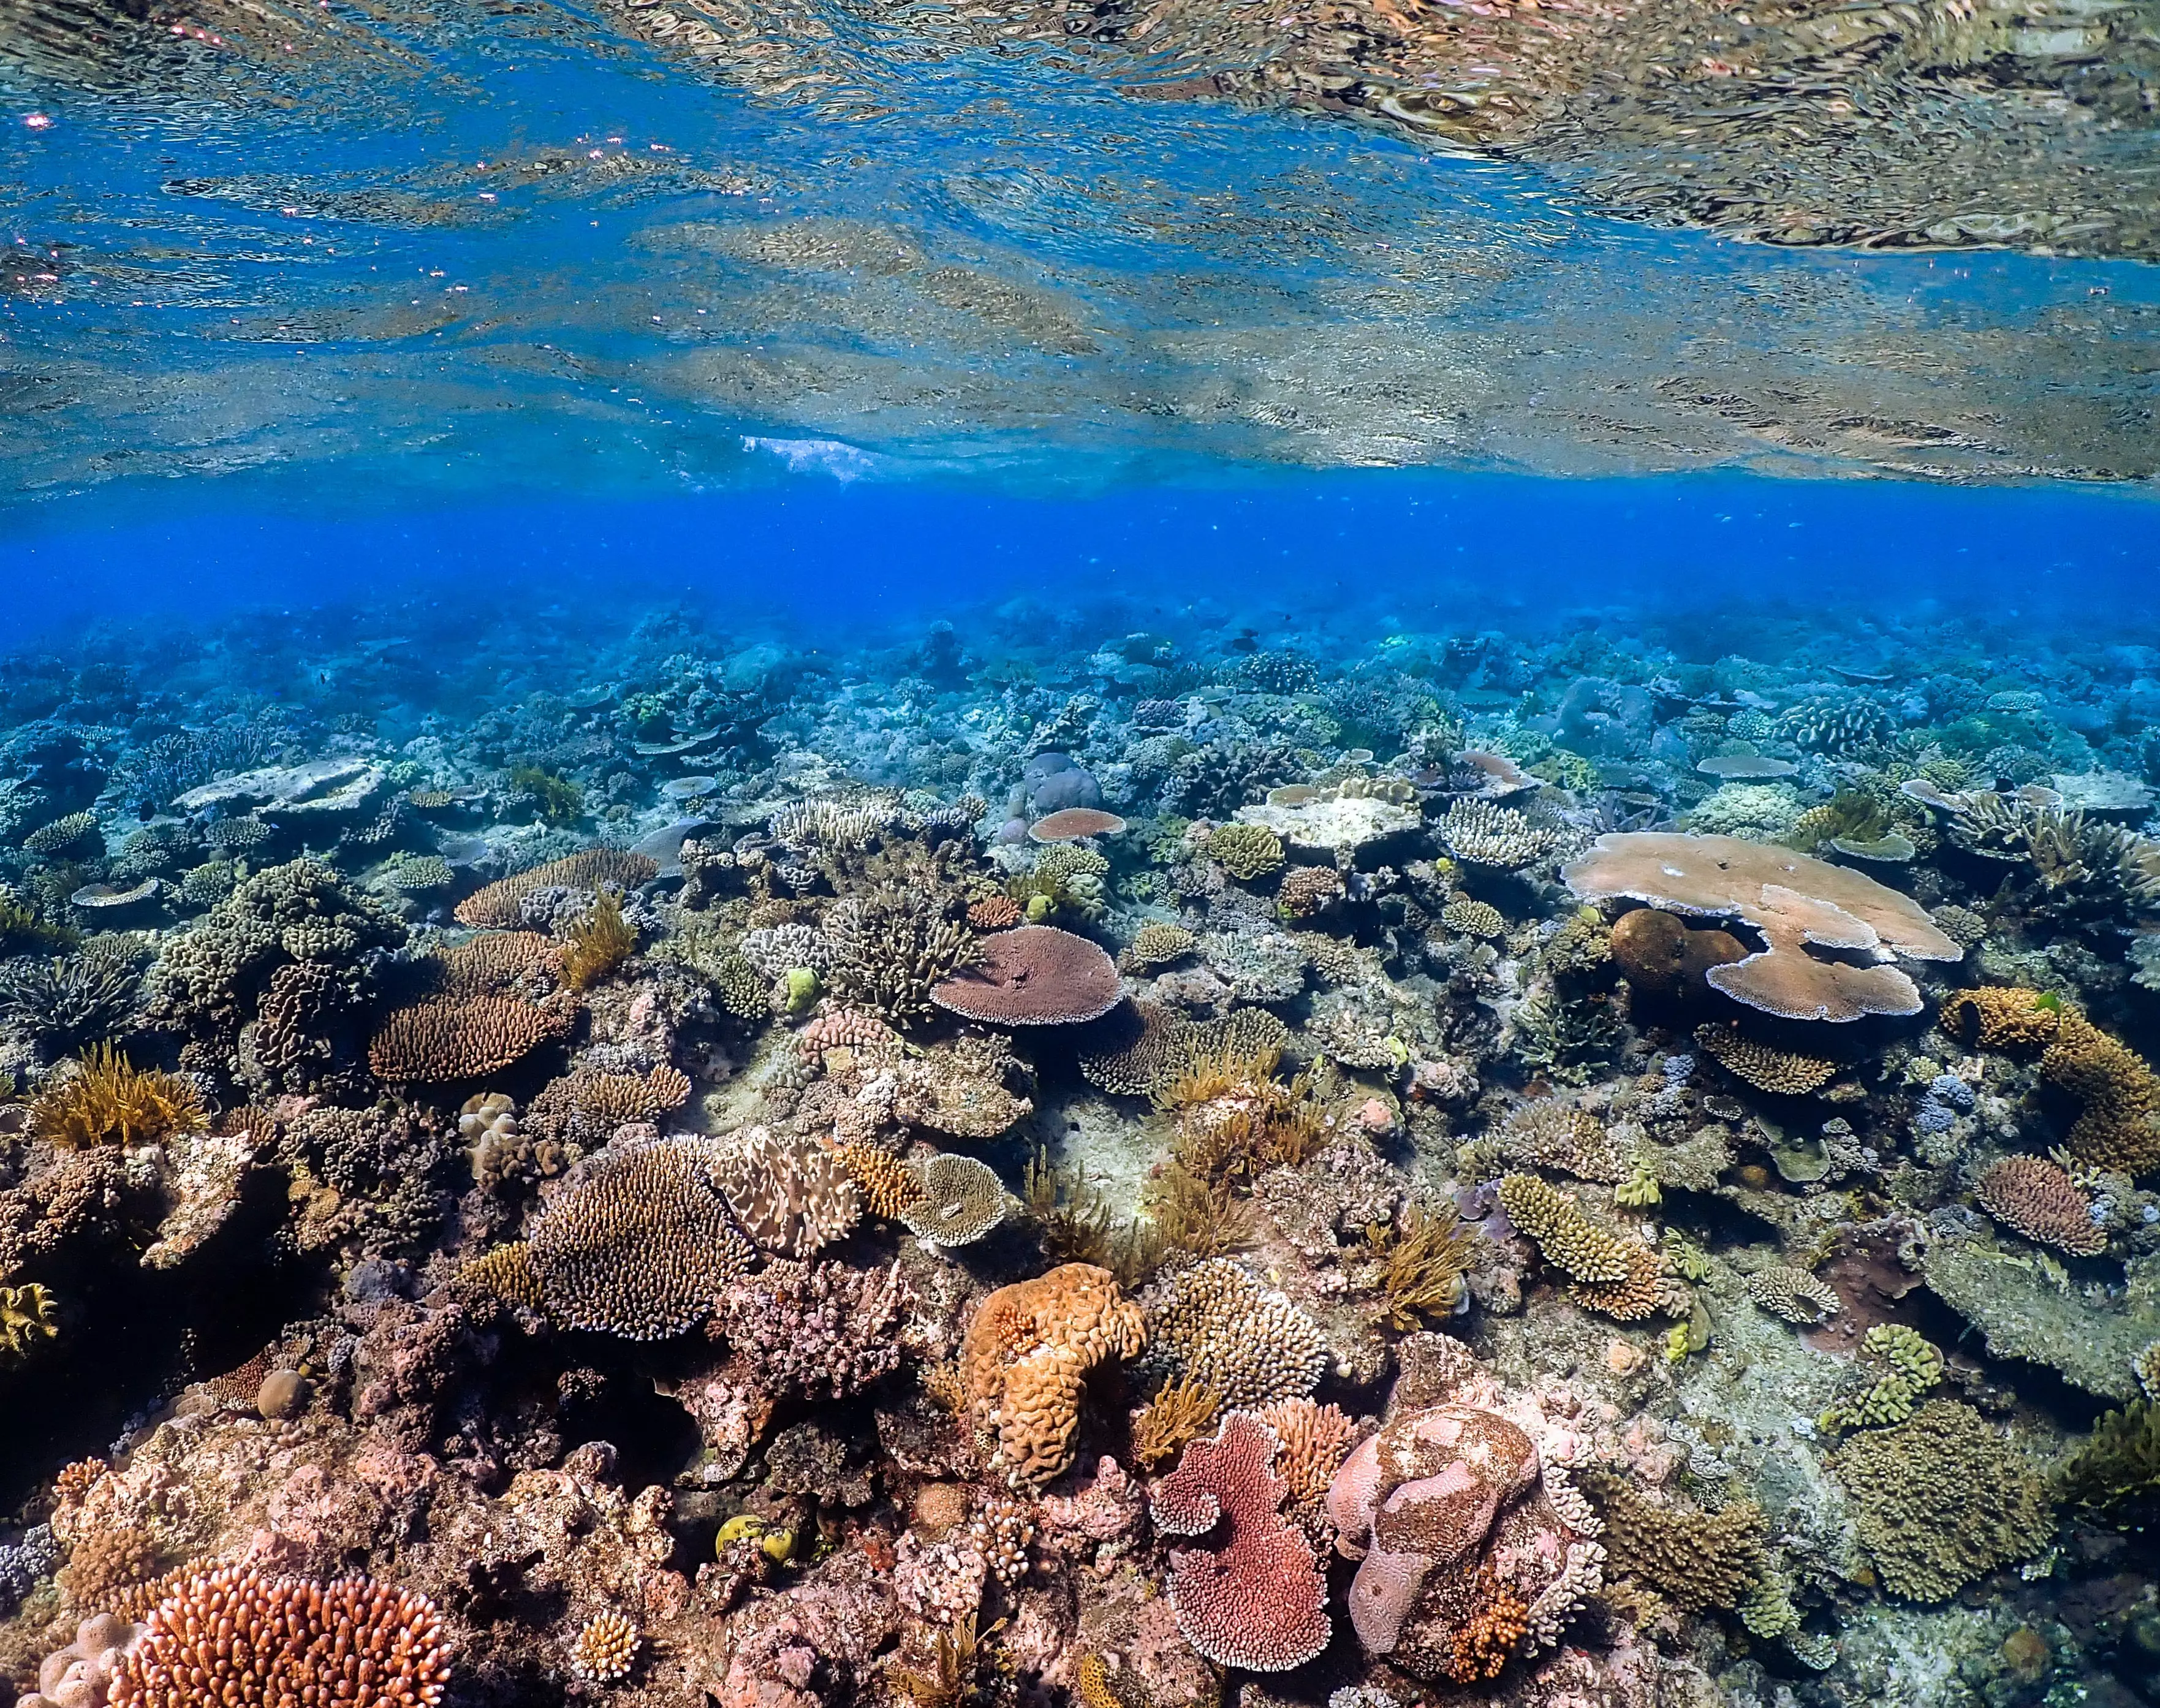 One third of the world's coral reefs were affected by bleaching in 2016 (